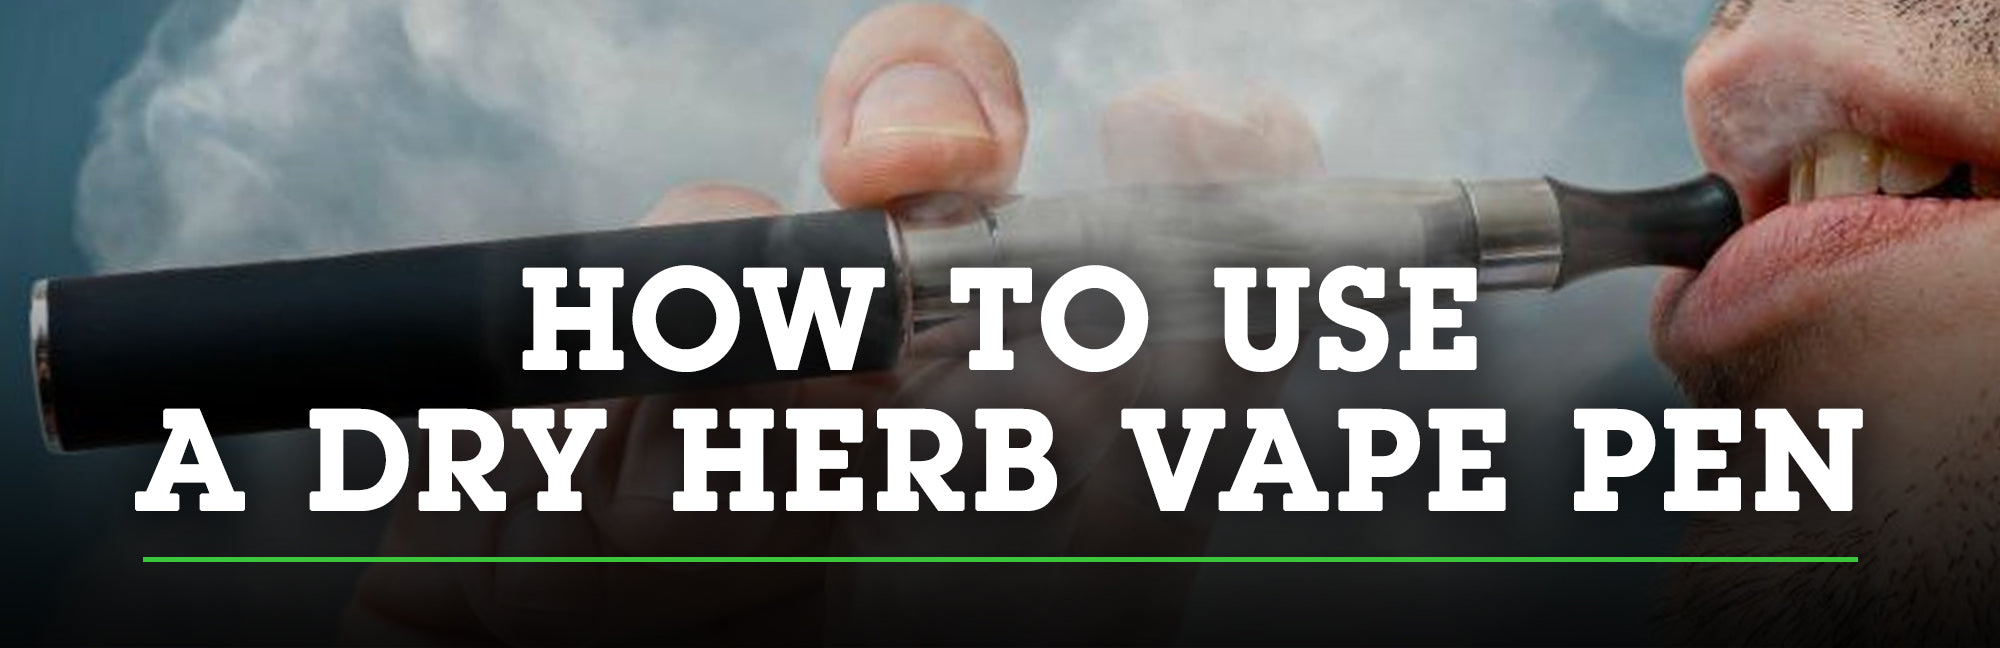 how-to-use-a-dry-herb-vape-pen